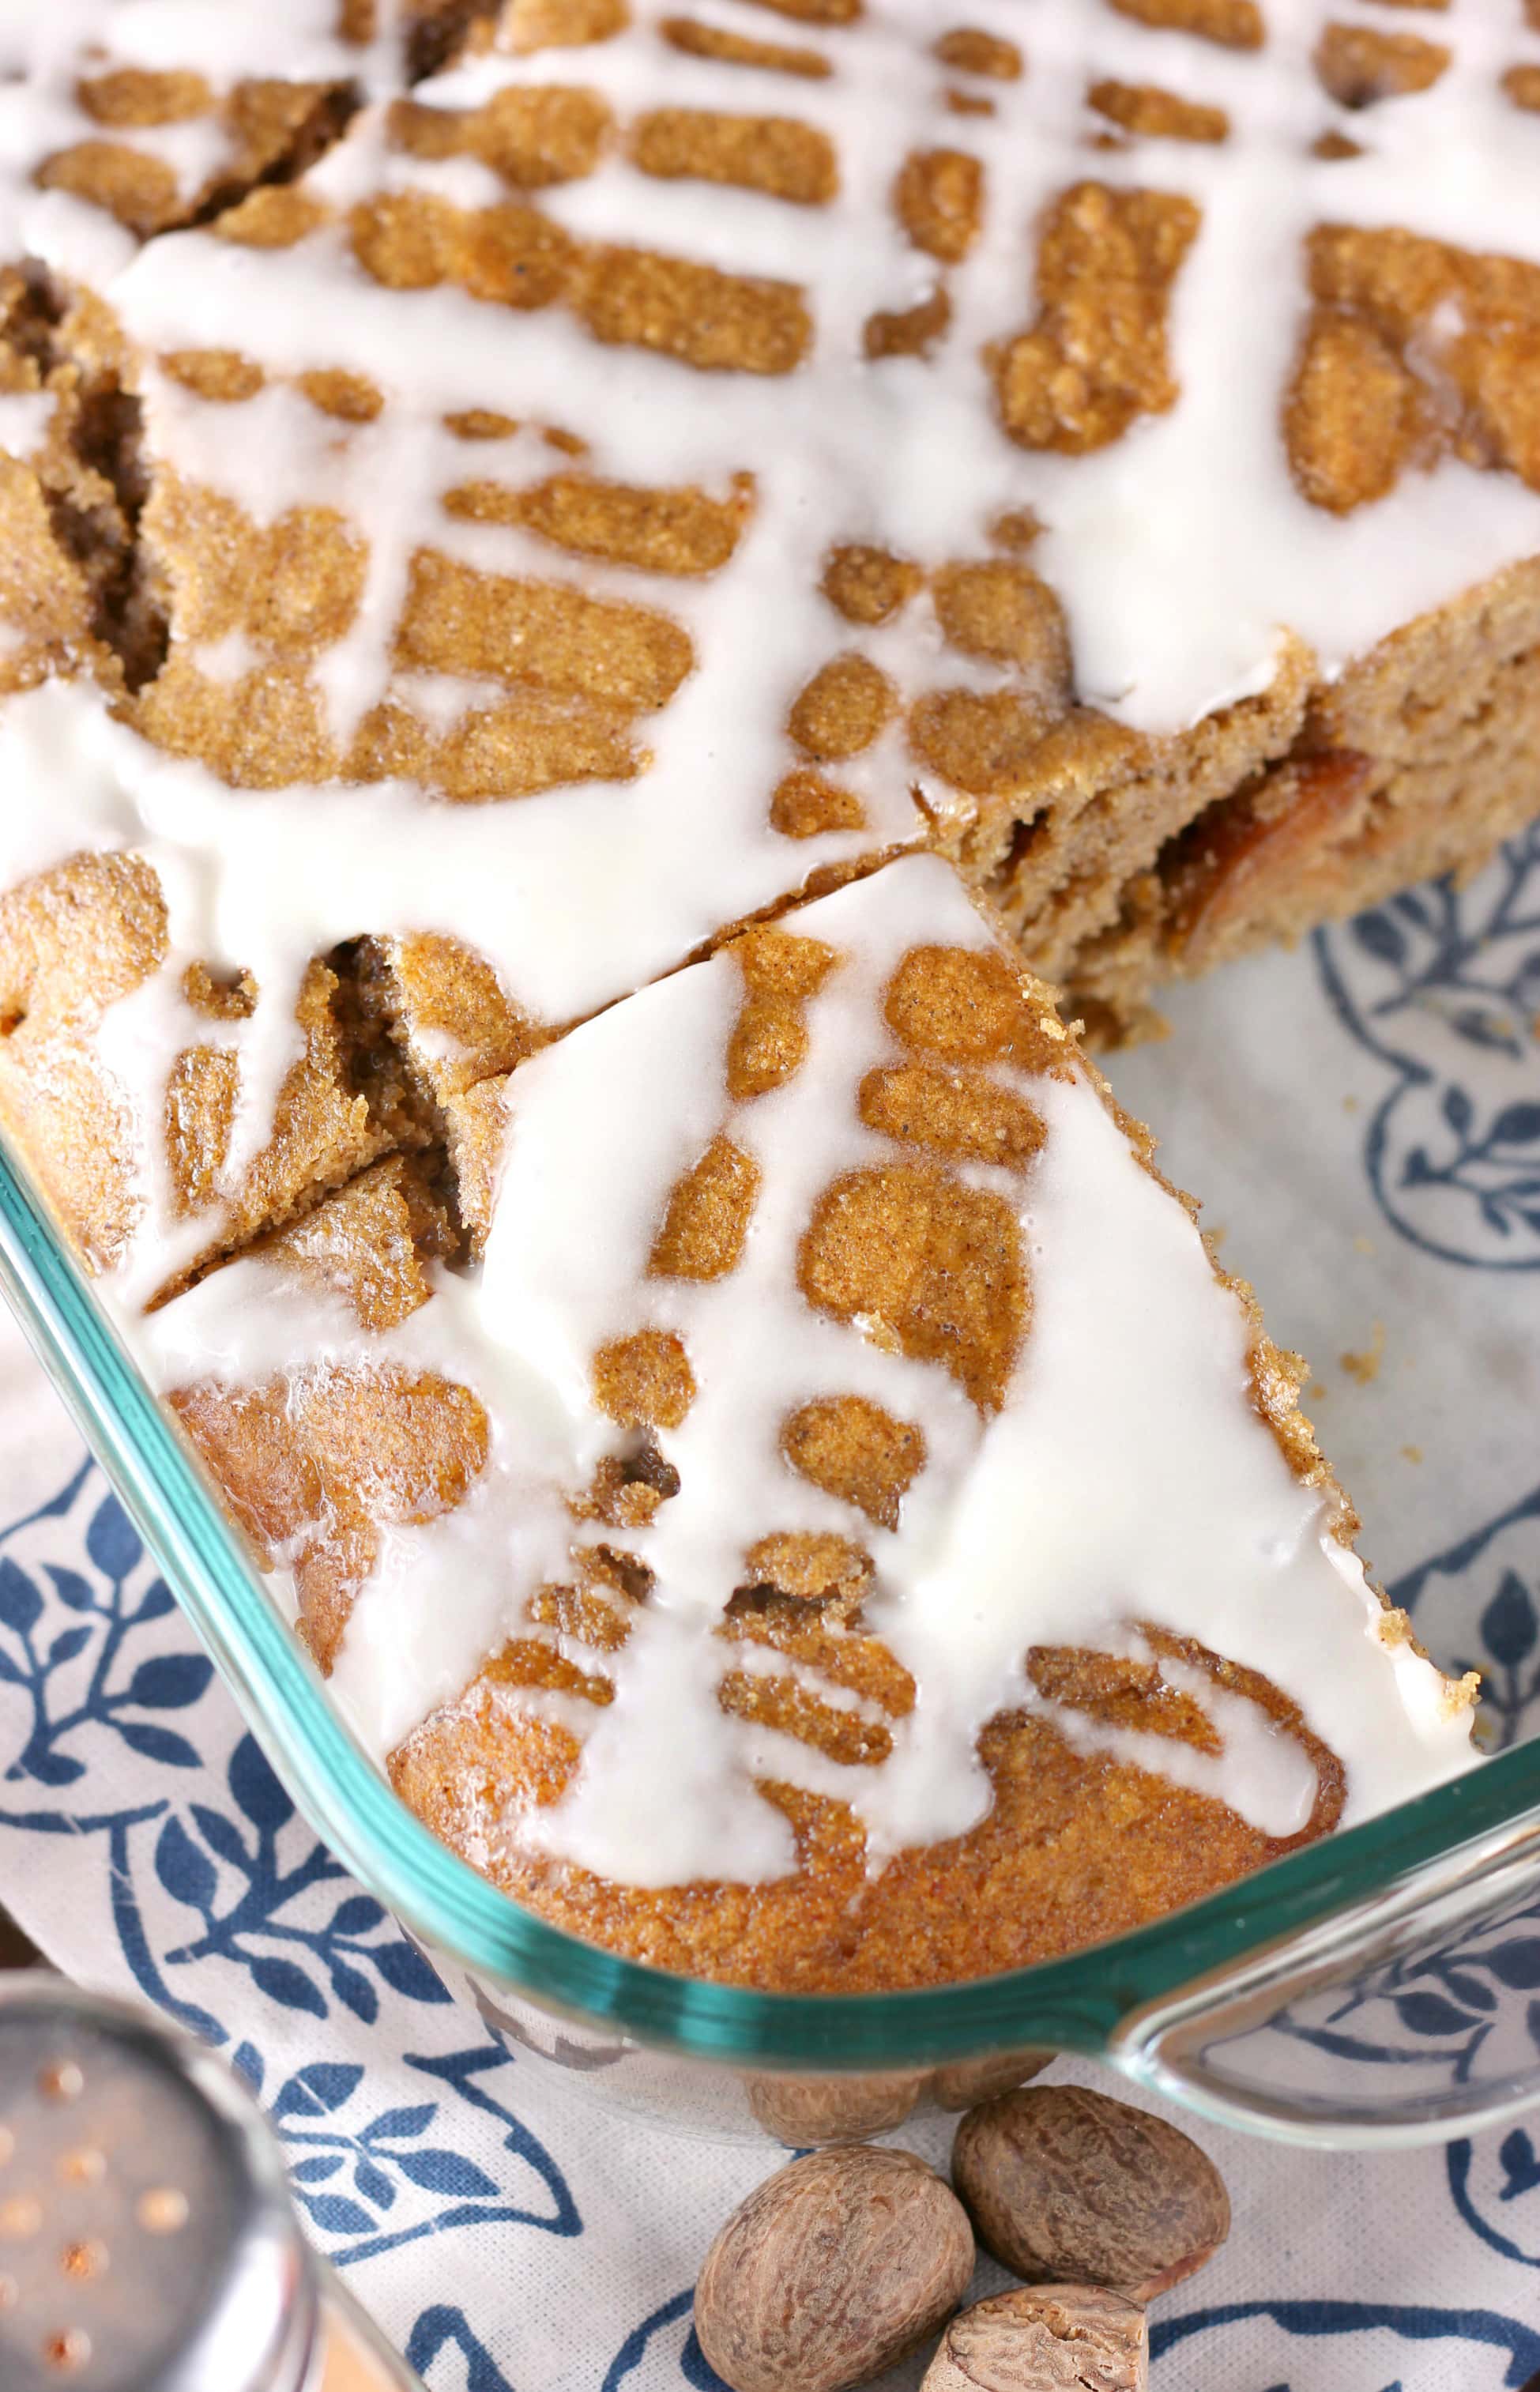 Brown Butter Apple Yogurt Snack Cake Recipe from A Kitchen Addiction